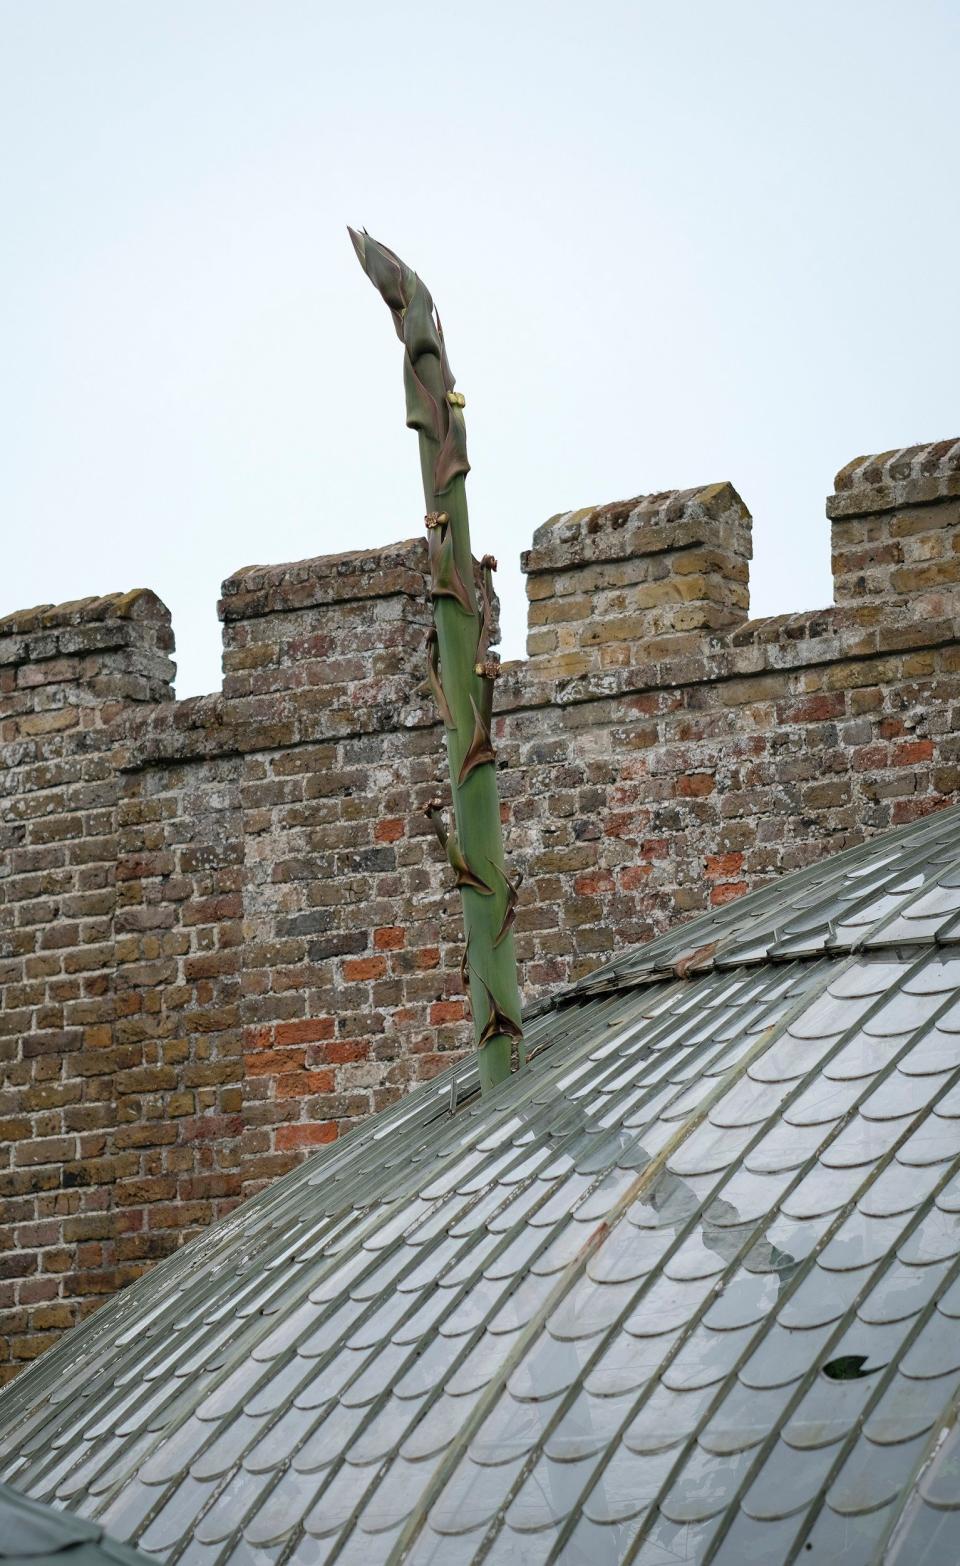 A rare Agave has burst through the roof of the Italianate Glasshouse in the King George VI park in Ramsgate, Kent - Credit: Christopher Pledger 